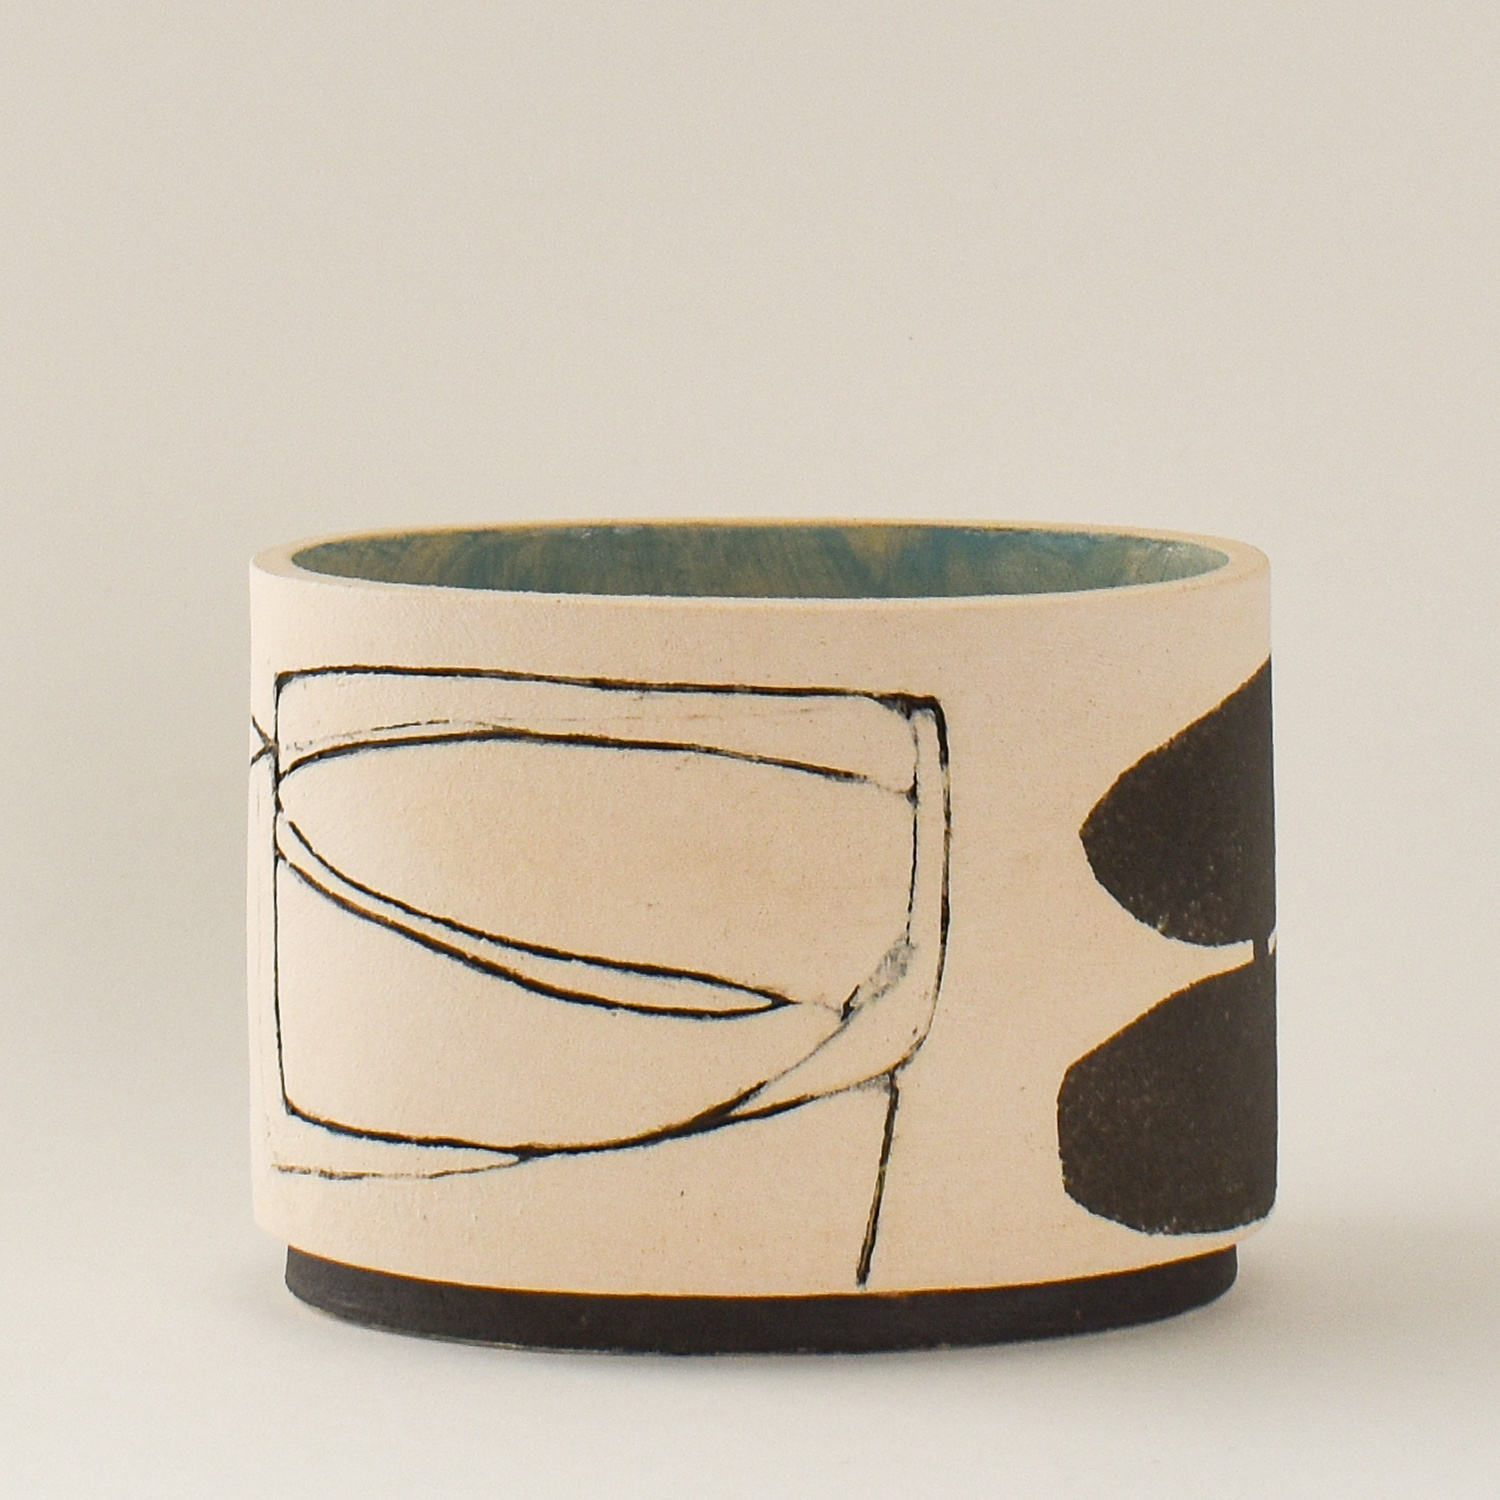 Oval Vessel with Foot, small by Louise McNiff